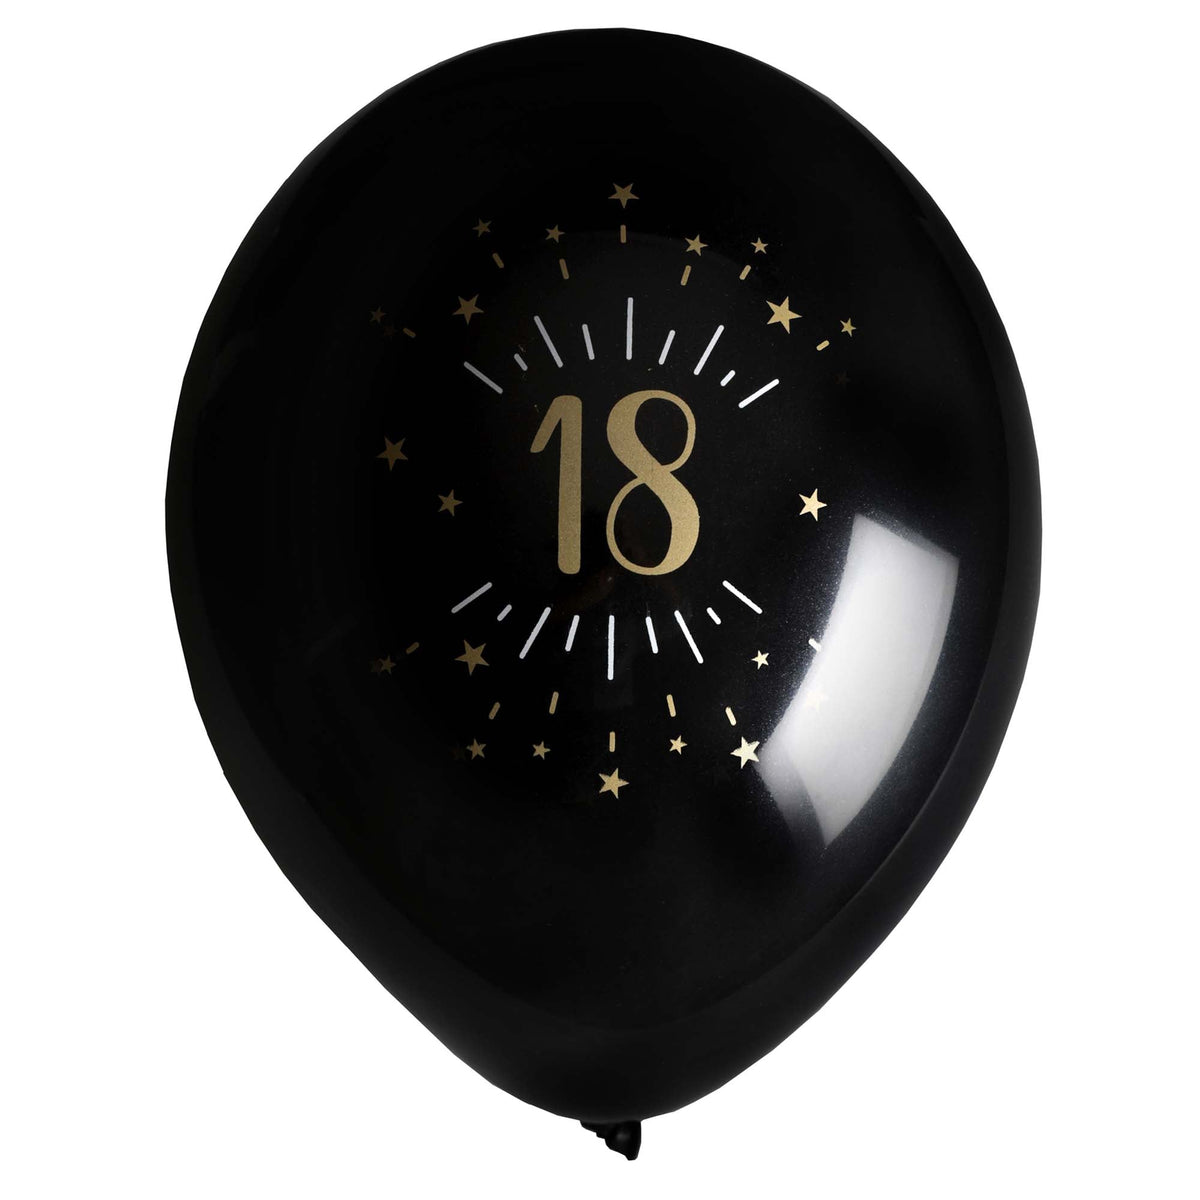 SANTEX Age Specific Birthday Black and Gold 18th Birthday Latex Balloons, 12 Inches, 6 Count 3660380070382